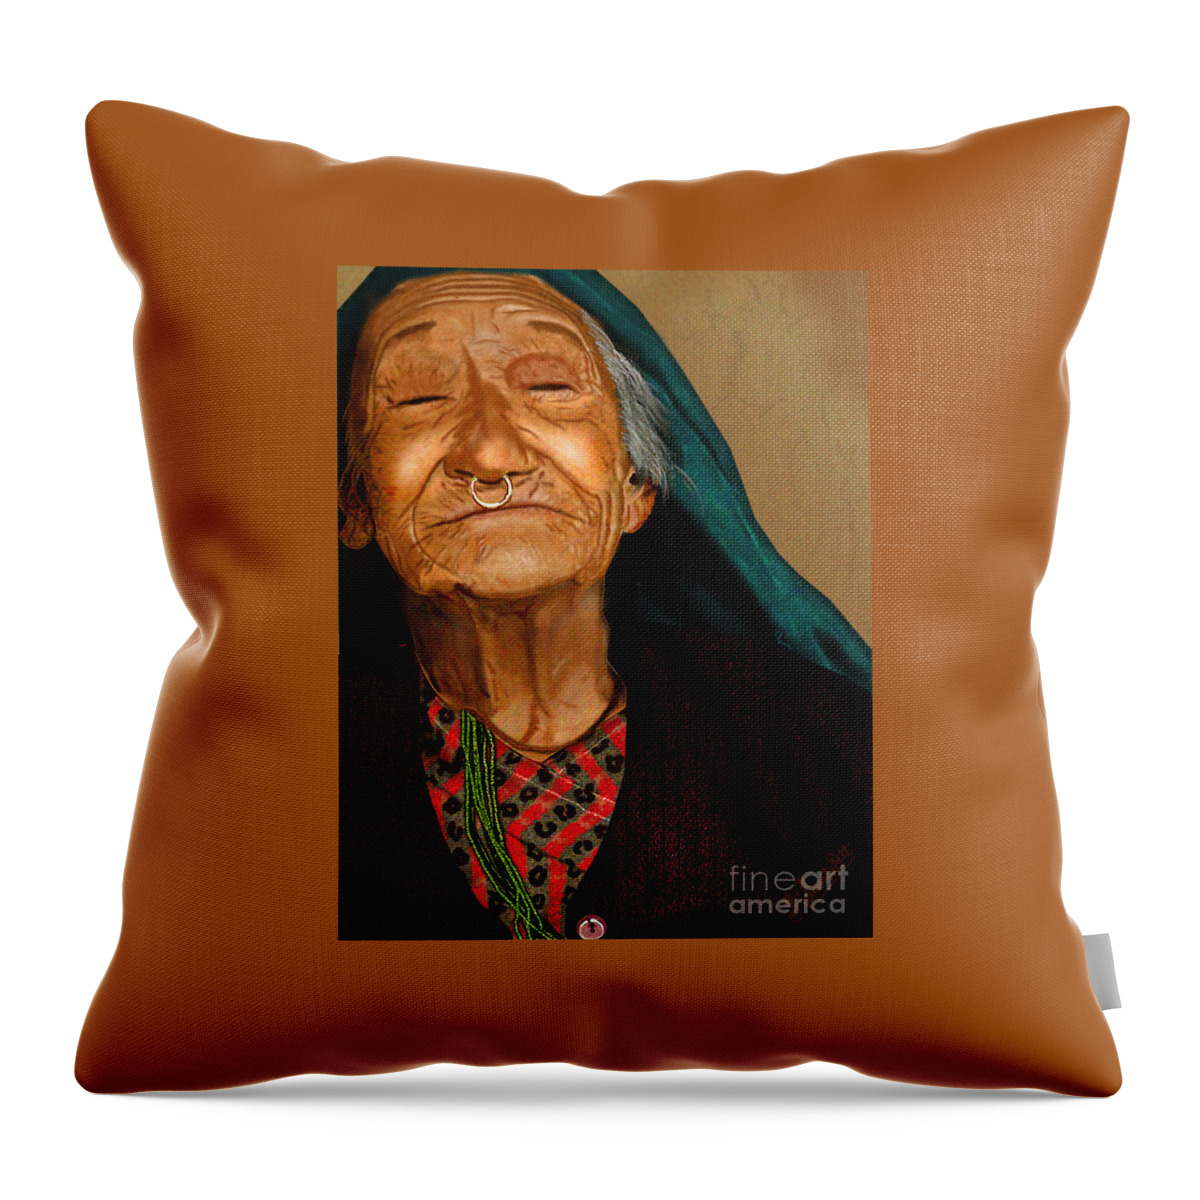 Acrylic Throw Pillow featuring the digital art Old women by Pixel Artist